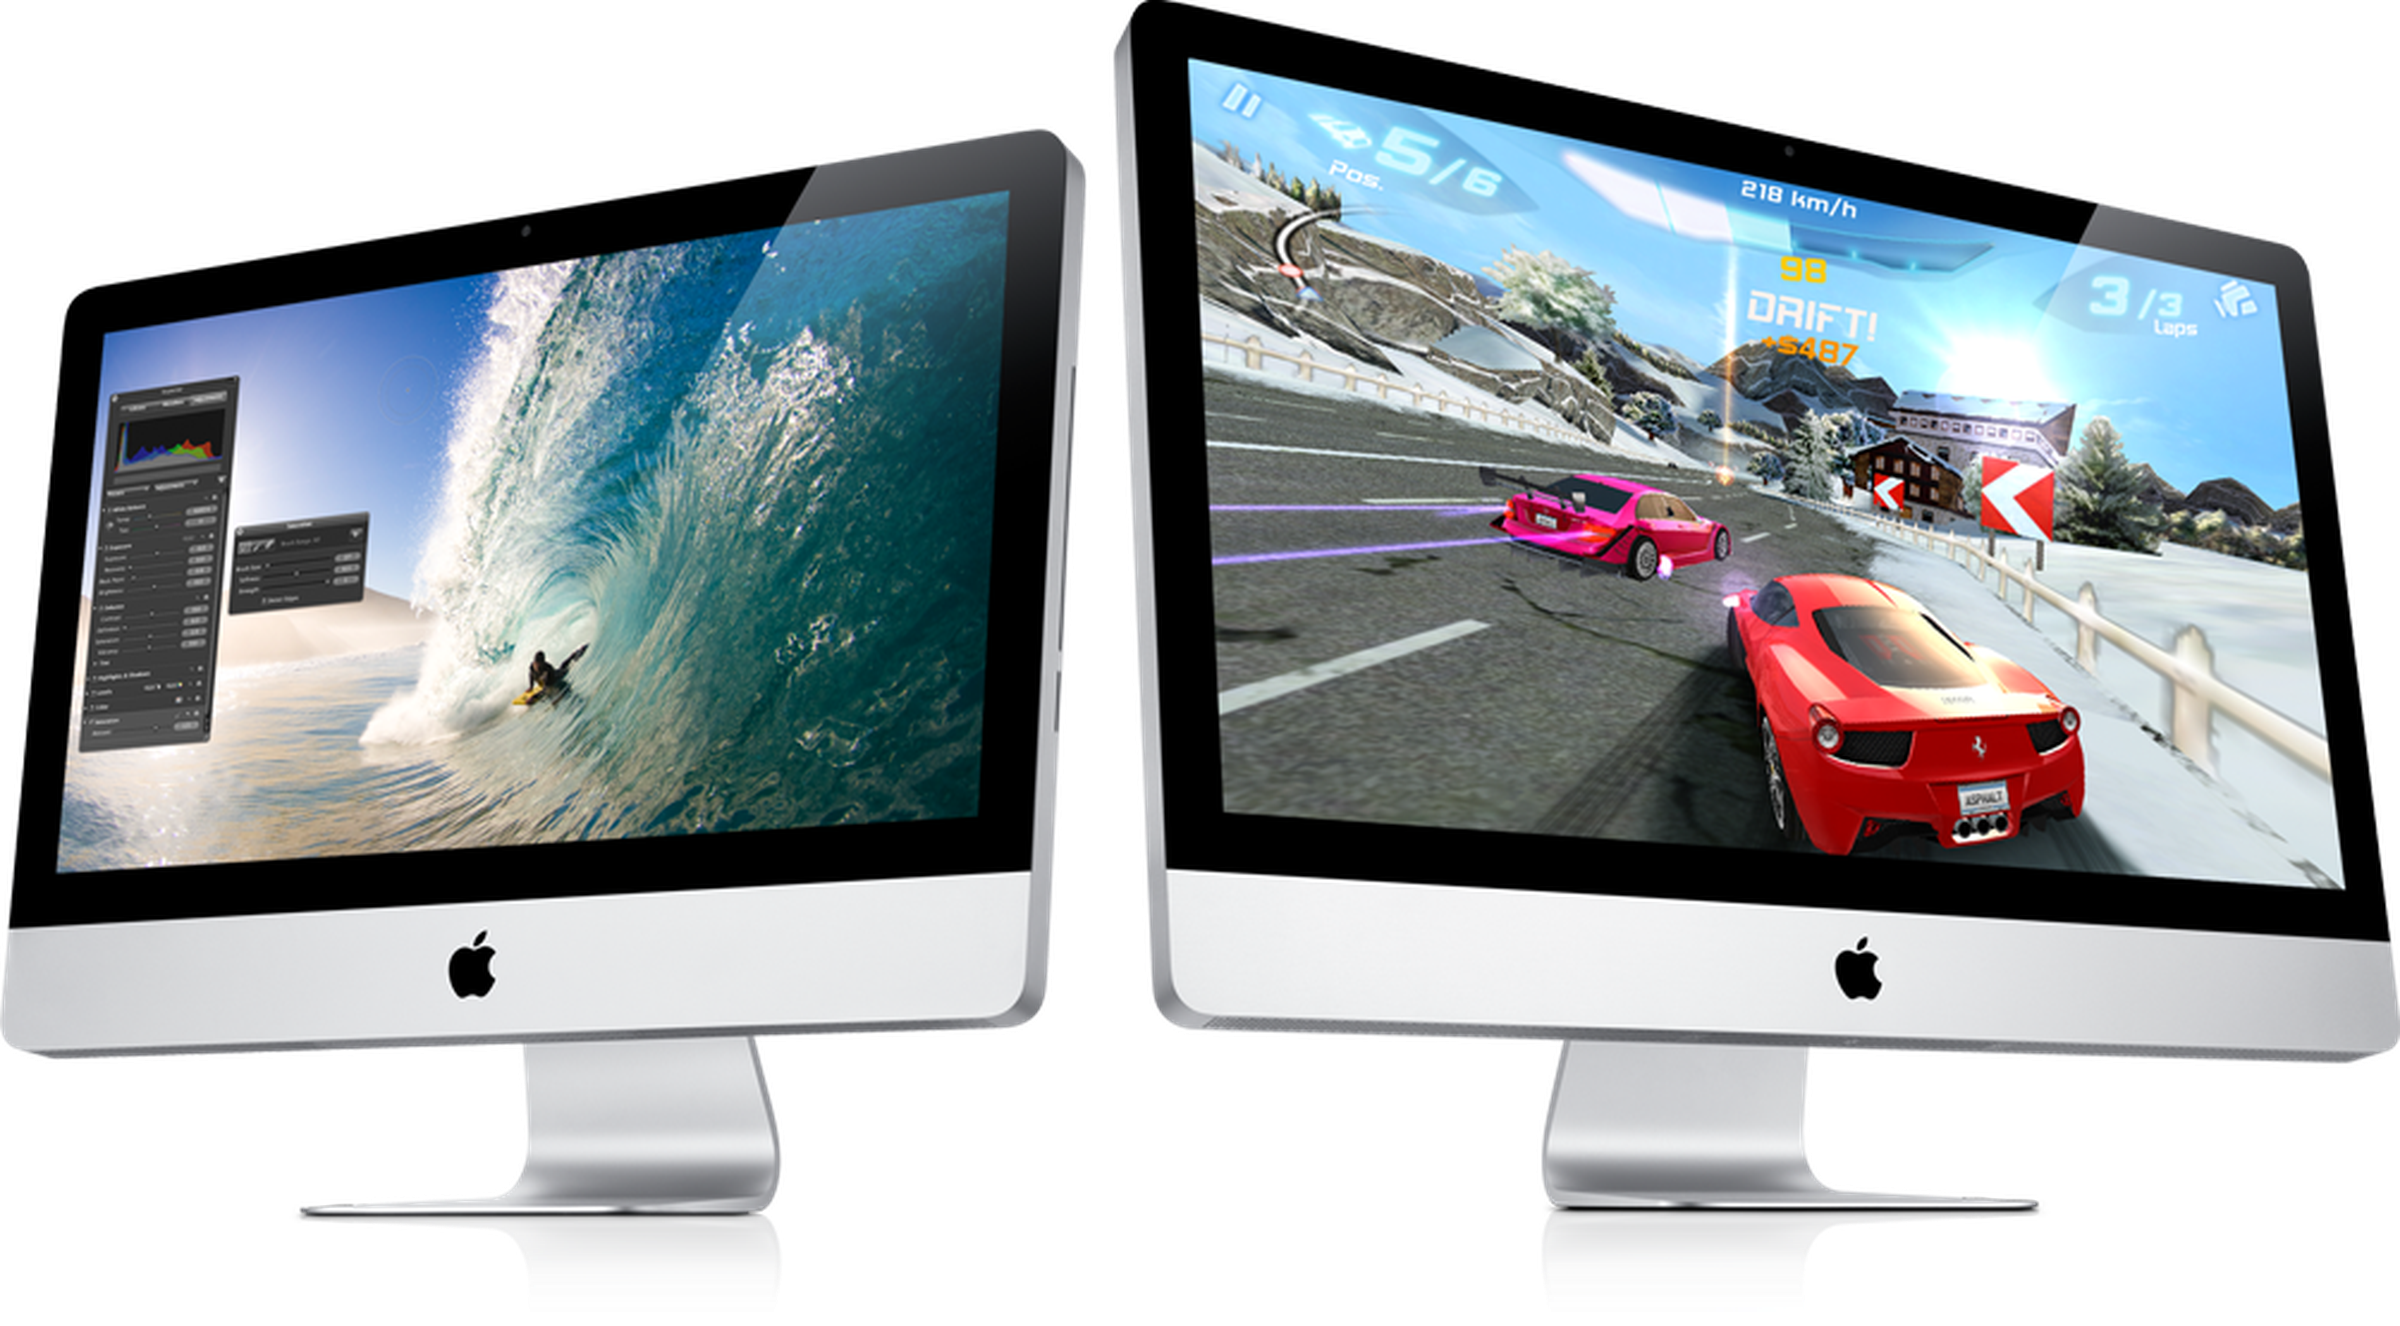 Apple refreshes iMac lineup with quad-core Sandy Bridge processors, FaceTime HD, and Thunderbolt